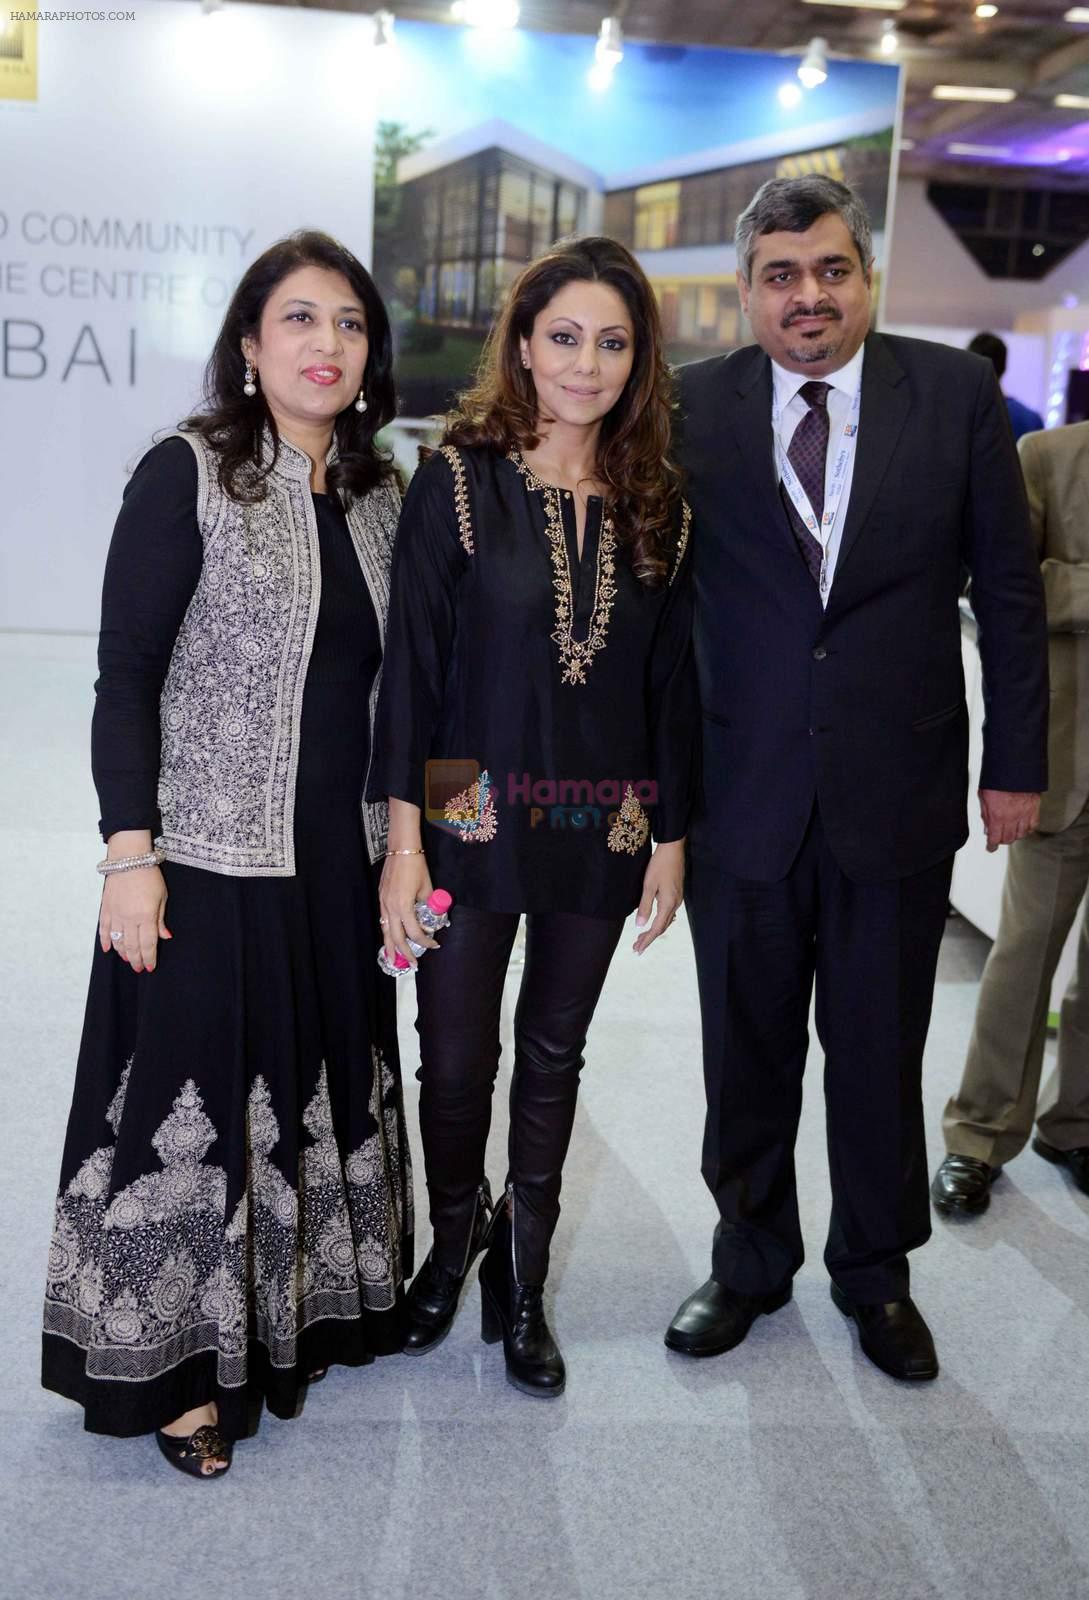 Gauri khan during the Lamp Lighting & Inauguration of IREX International Real Estate Expo 2015 in Delhi on 4th Dec 2015